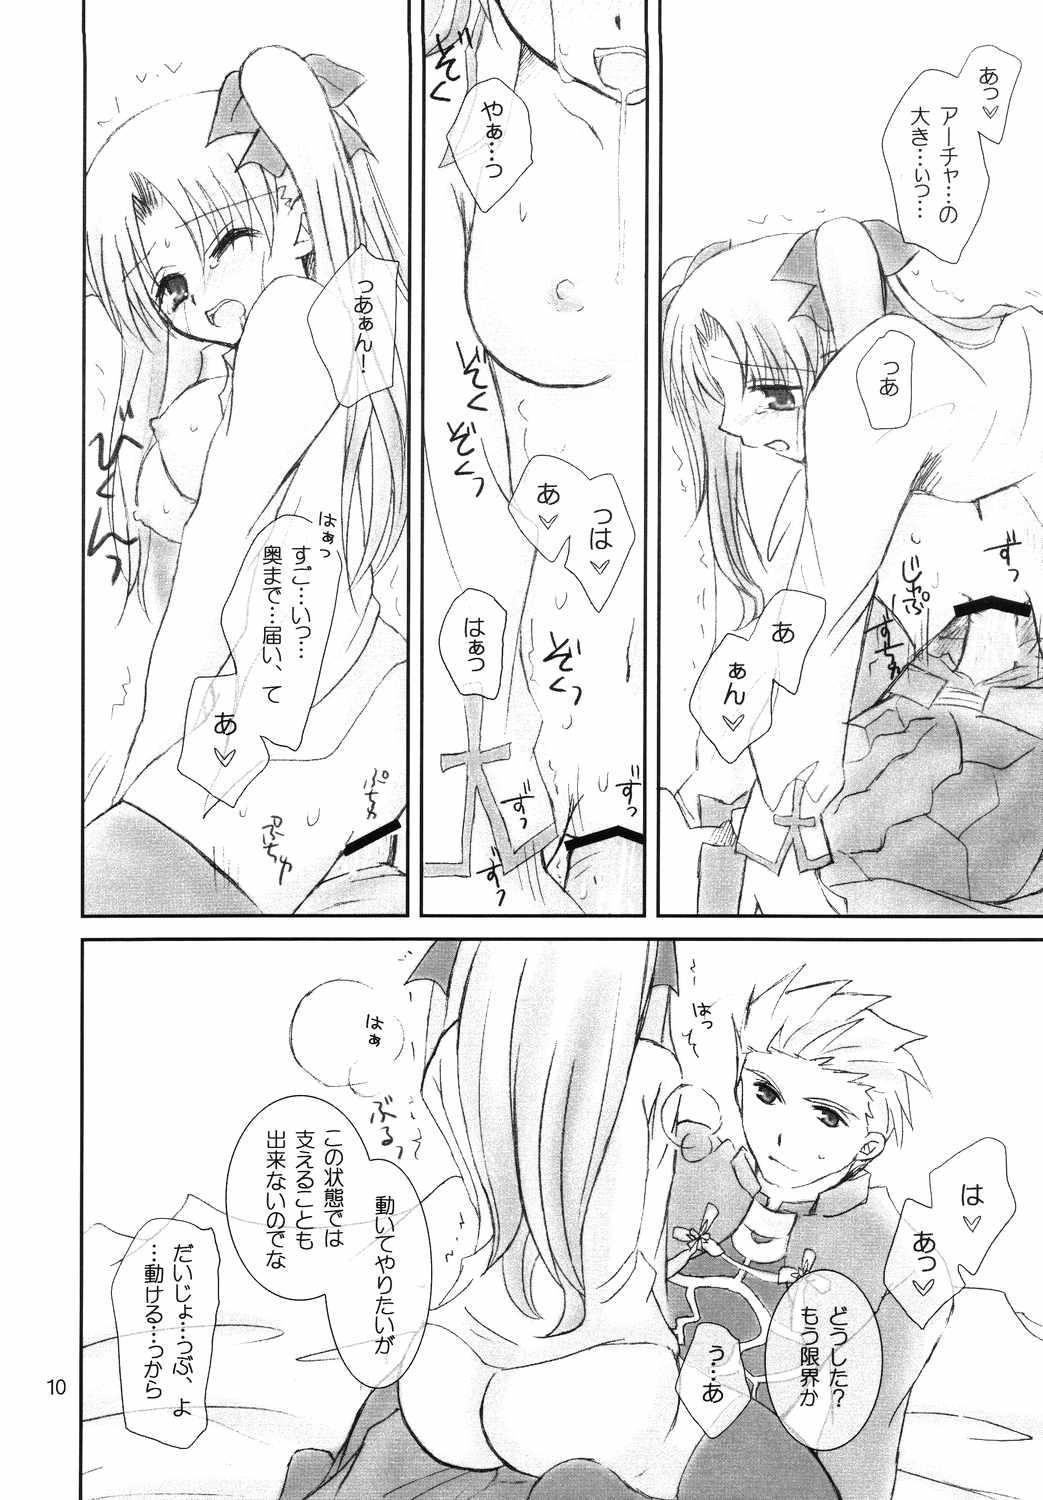 Anal Play Restraint. - Fate stay night Cream - Page 9